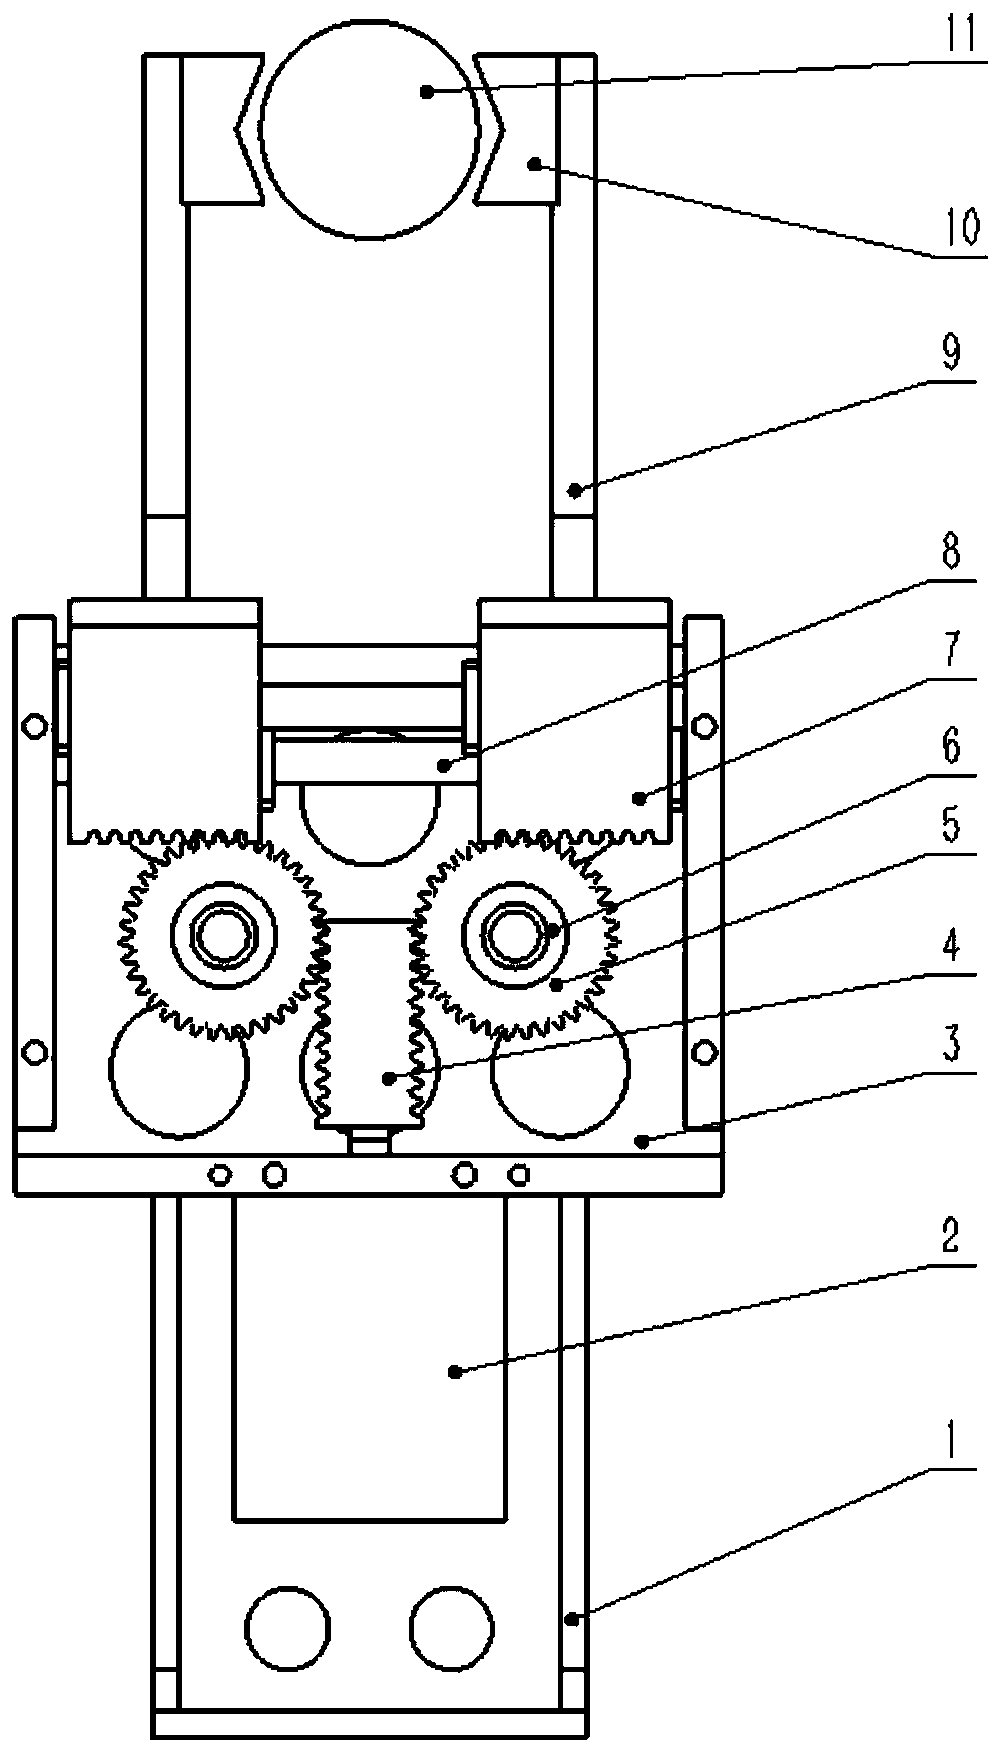 Centering clamping jaw based on gear and rack driving